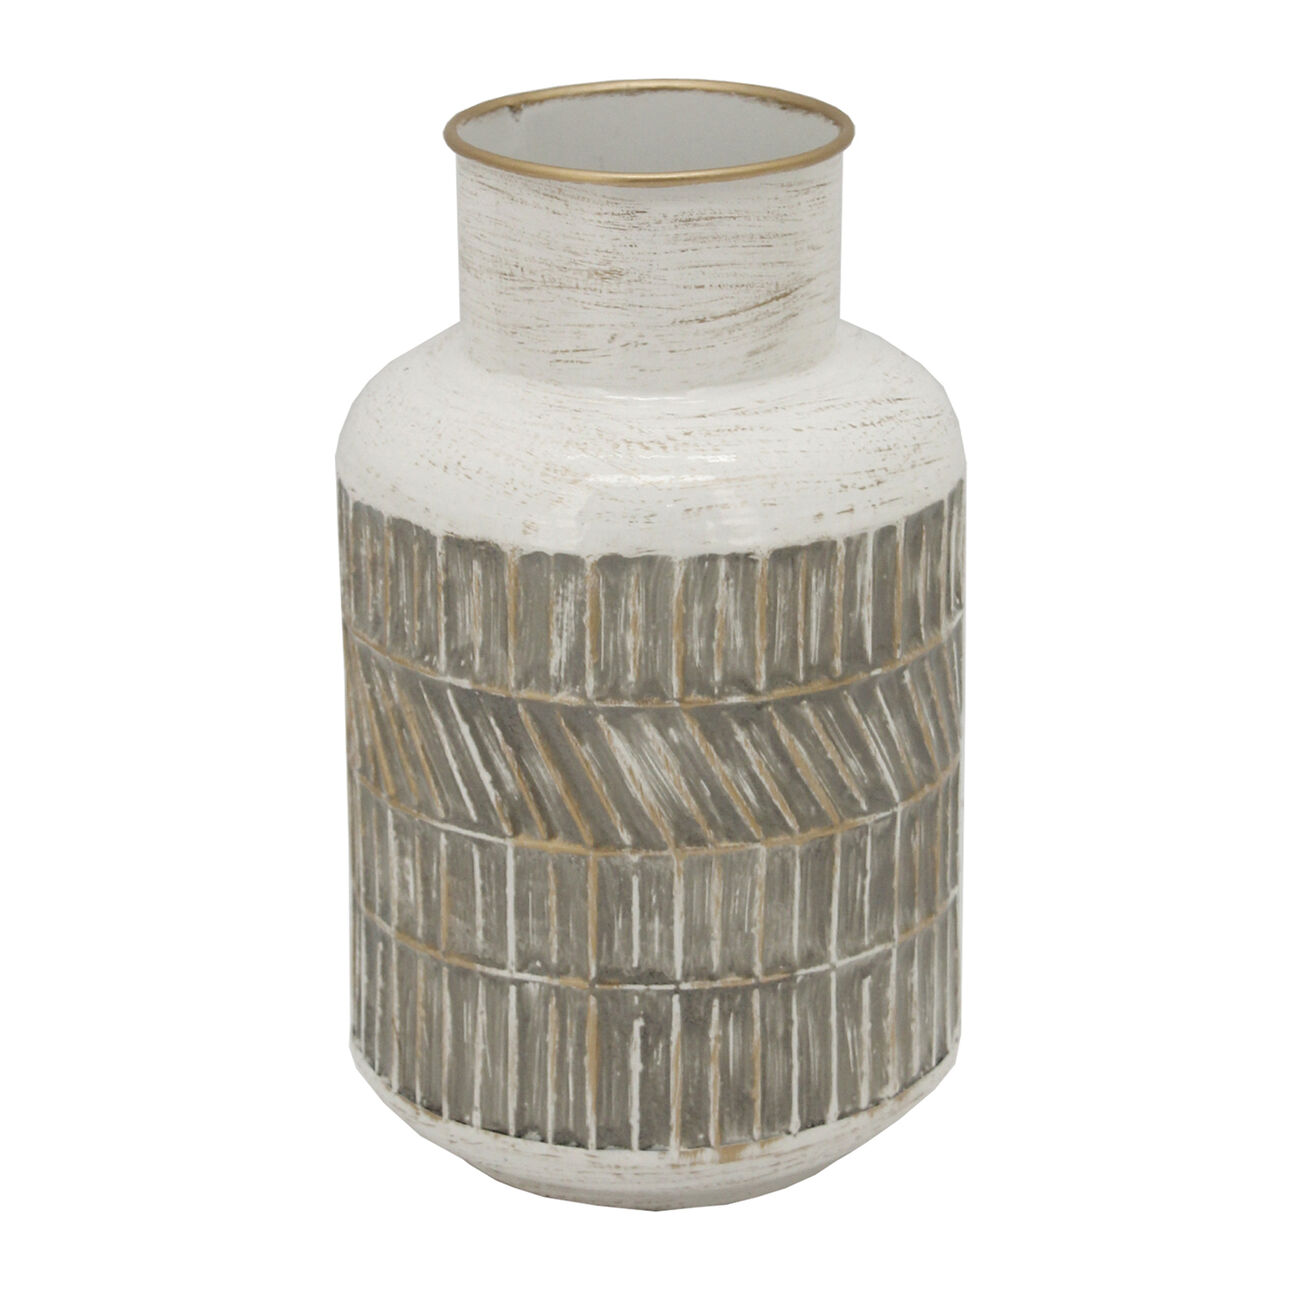 10 Inch Milk Jar Design Accent Decor with Tapered Bottom Base, Gray